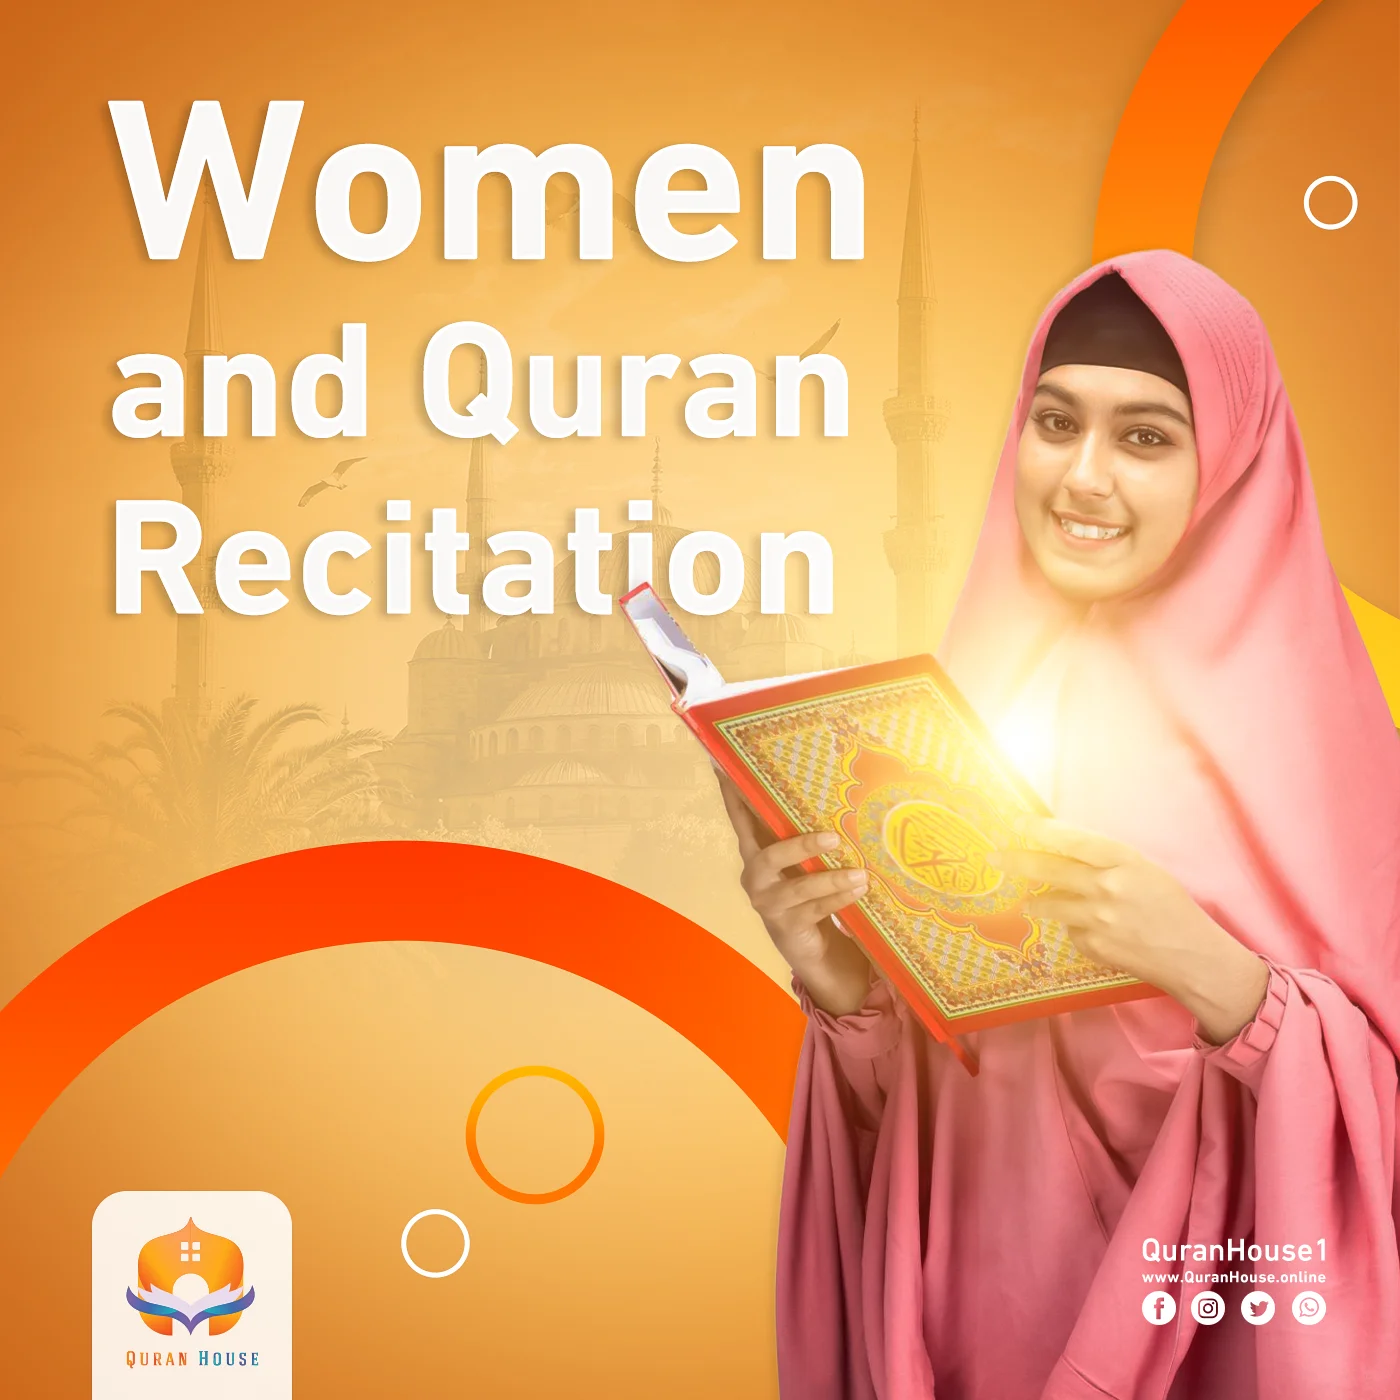 can a woman read quran without hijab